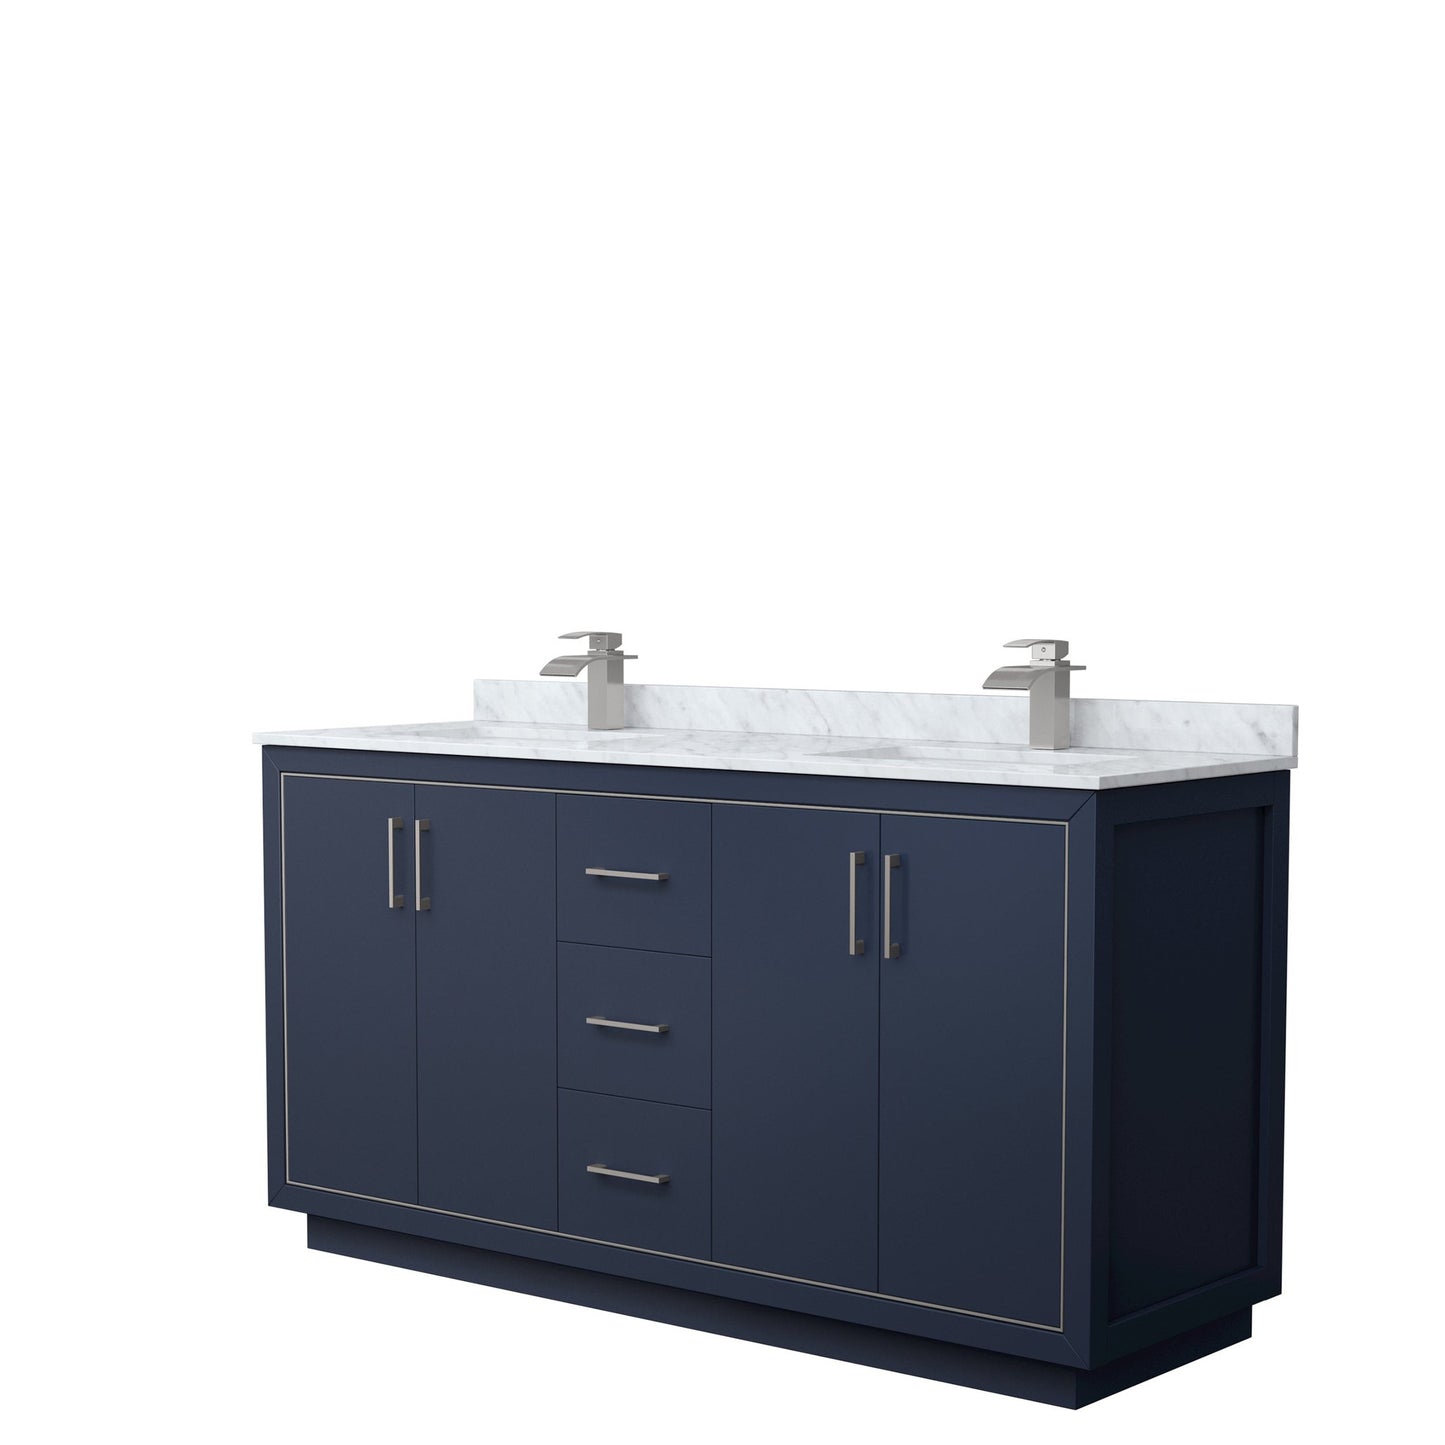 Wyndham Collection Icon 66" Double Bathroom Vanity in Dark Blue, White Carrara Marble Countertop, Undermount Square Sinks, Brushed Nickel Trim